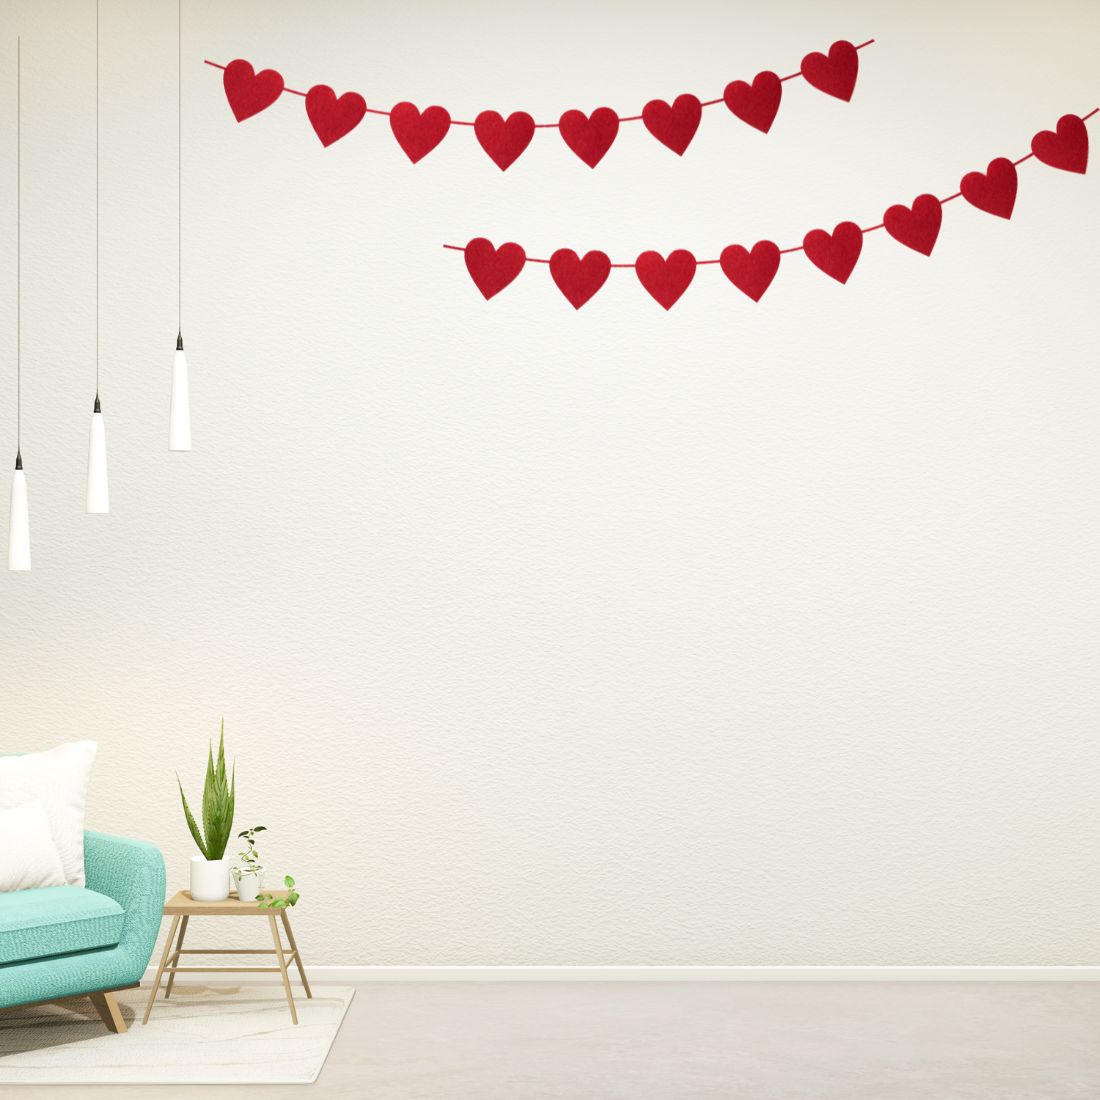 Valentines Day Heart Bunting - (4 Inches/250 GSM Cardstock/Red/24Pcs)